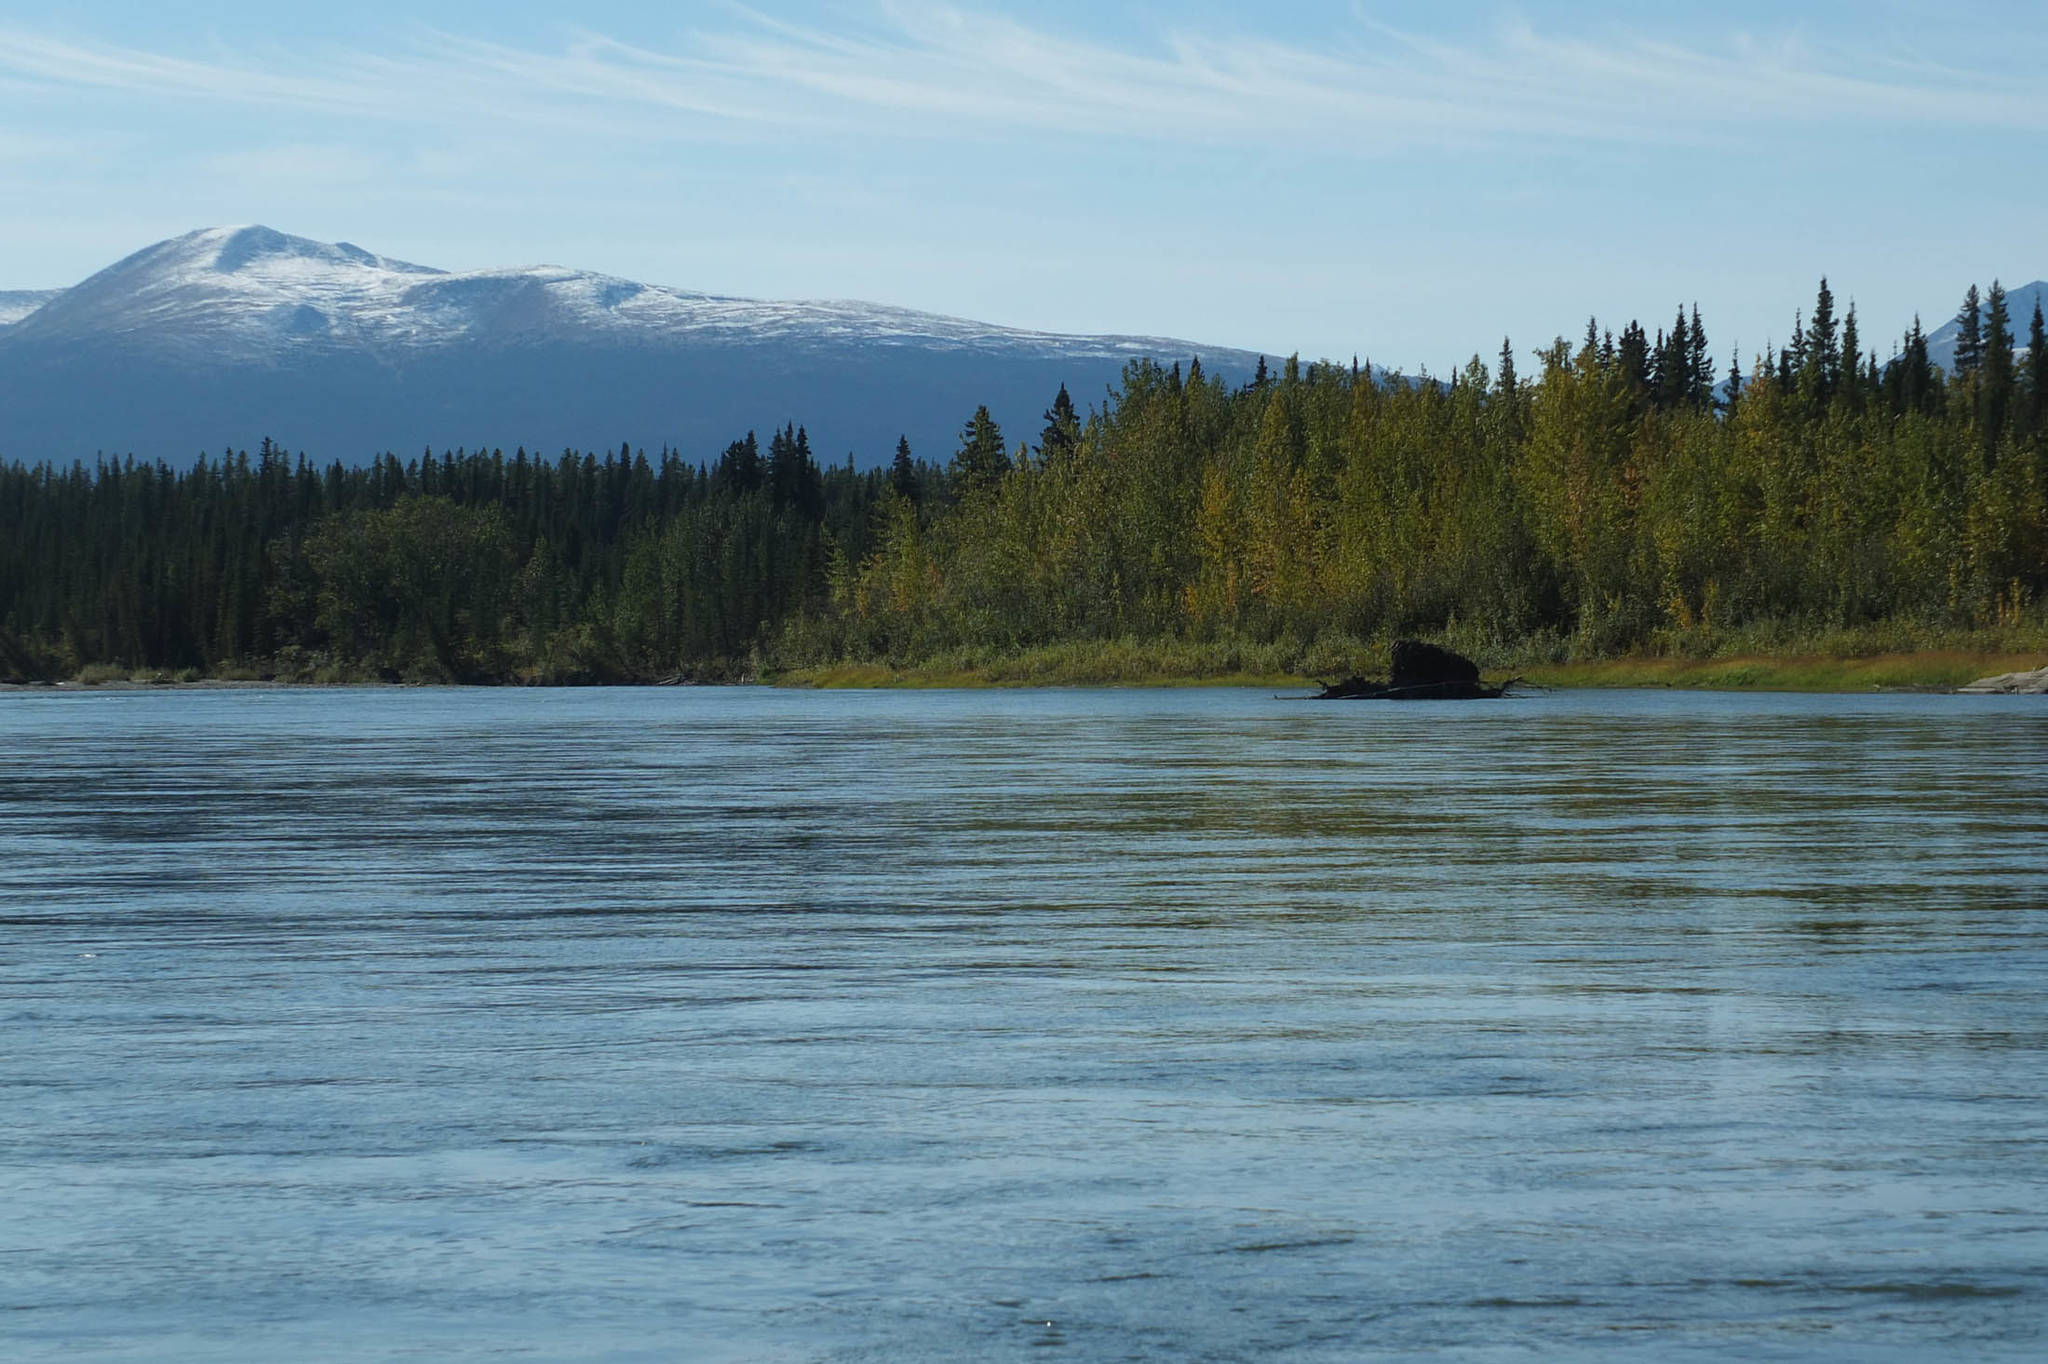 A vista of forest and mountains surrounding the Nisutlin River. Photo by Bjorn Dihle.